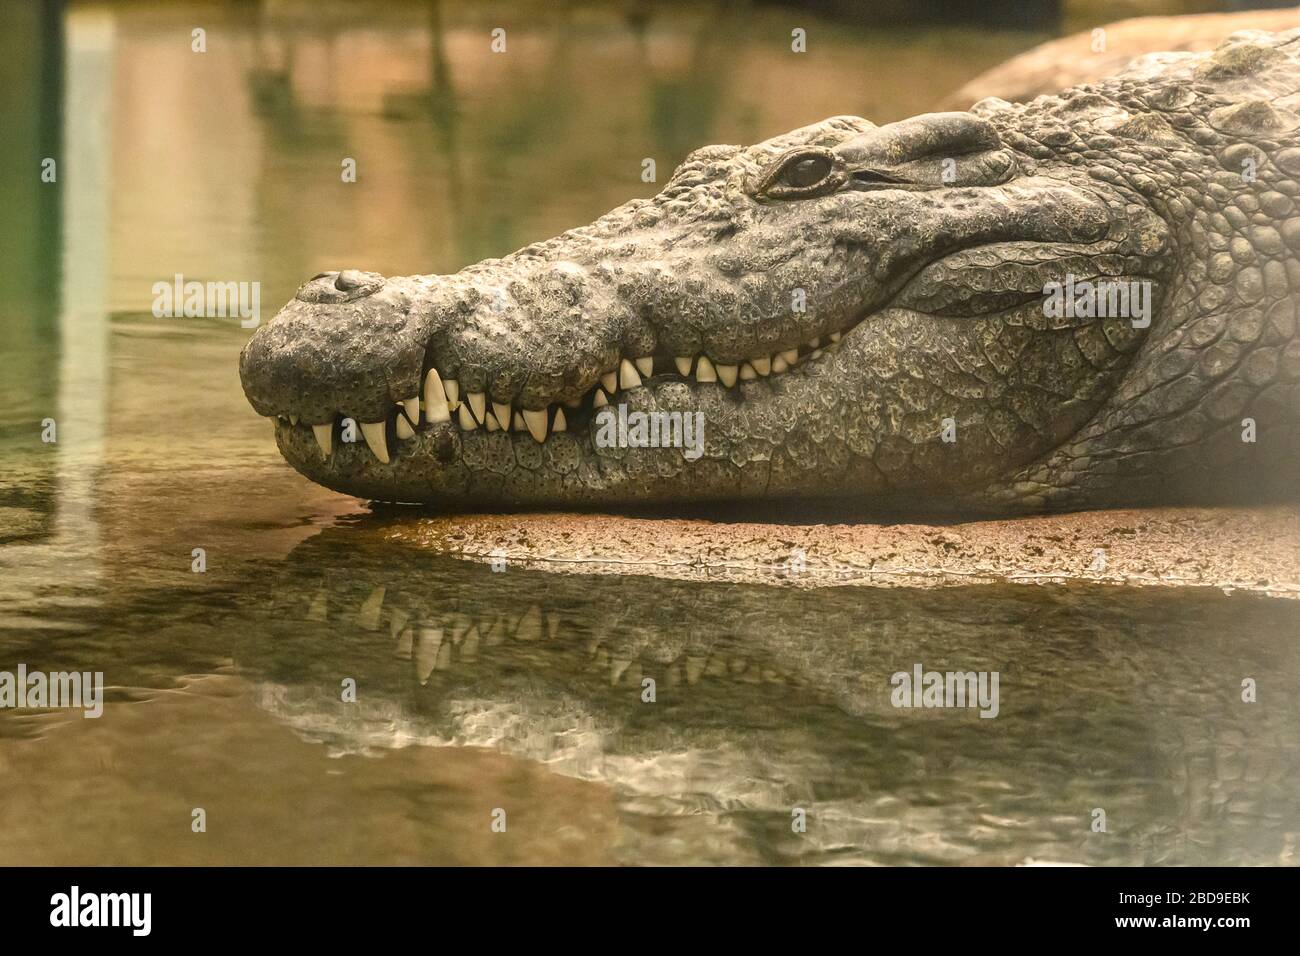 Alligator Teeth reflect in water of calm pond Stock Photo